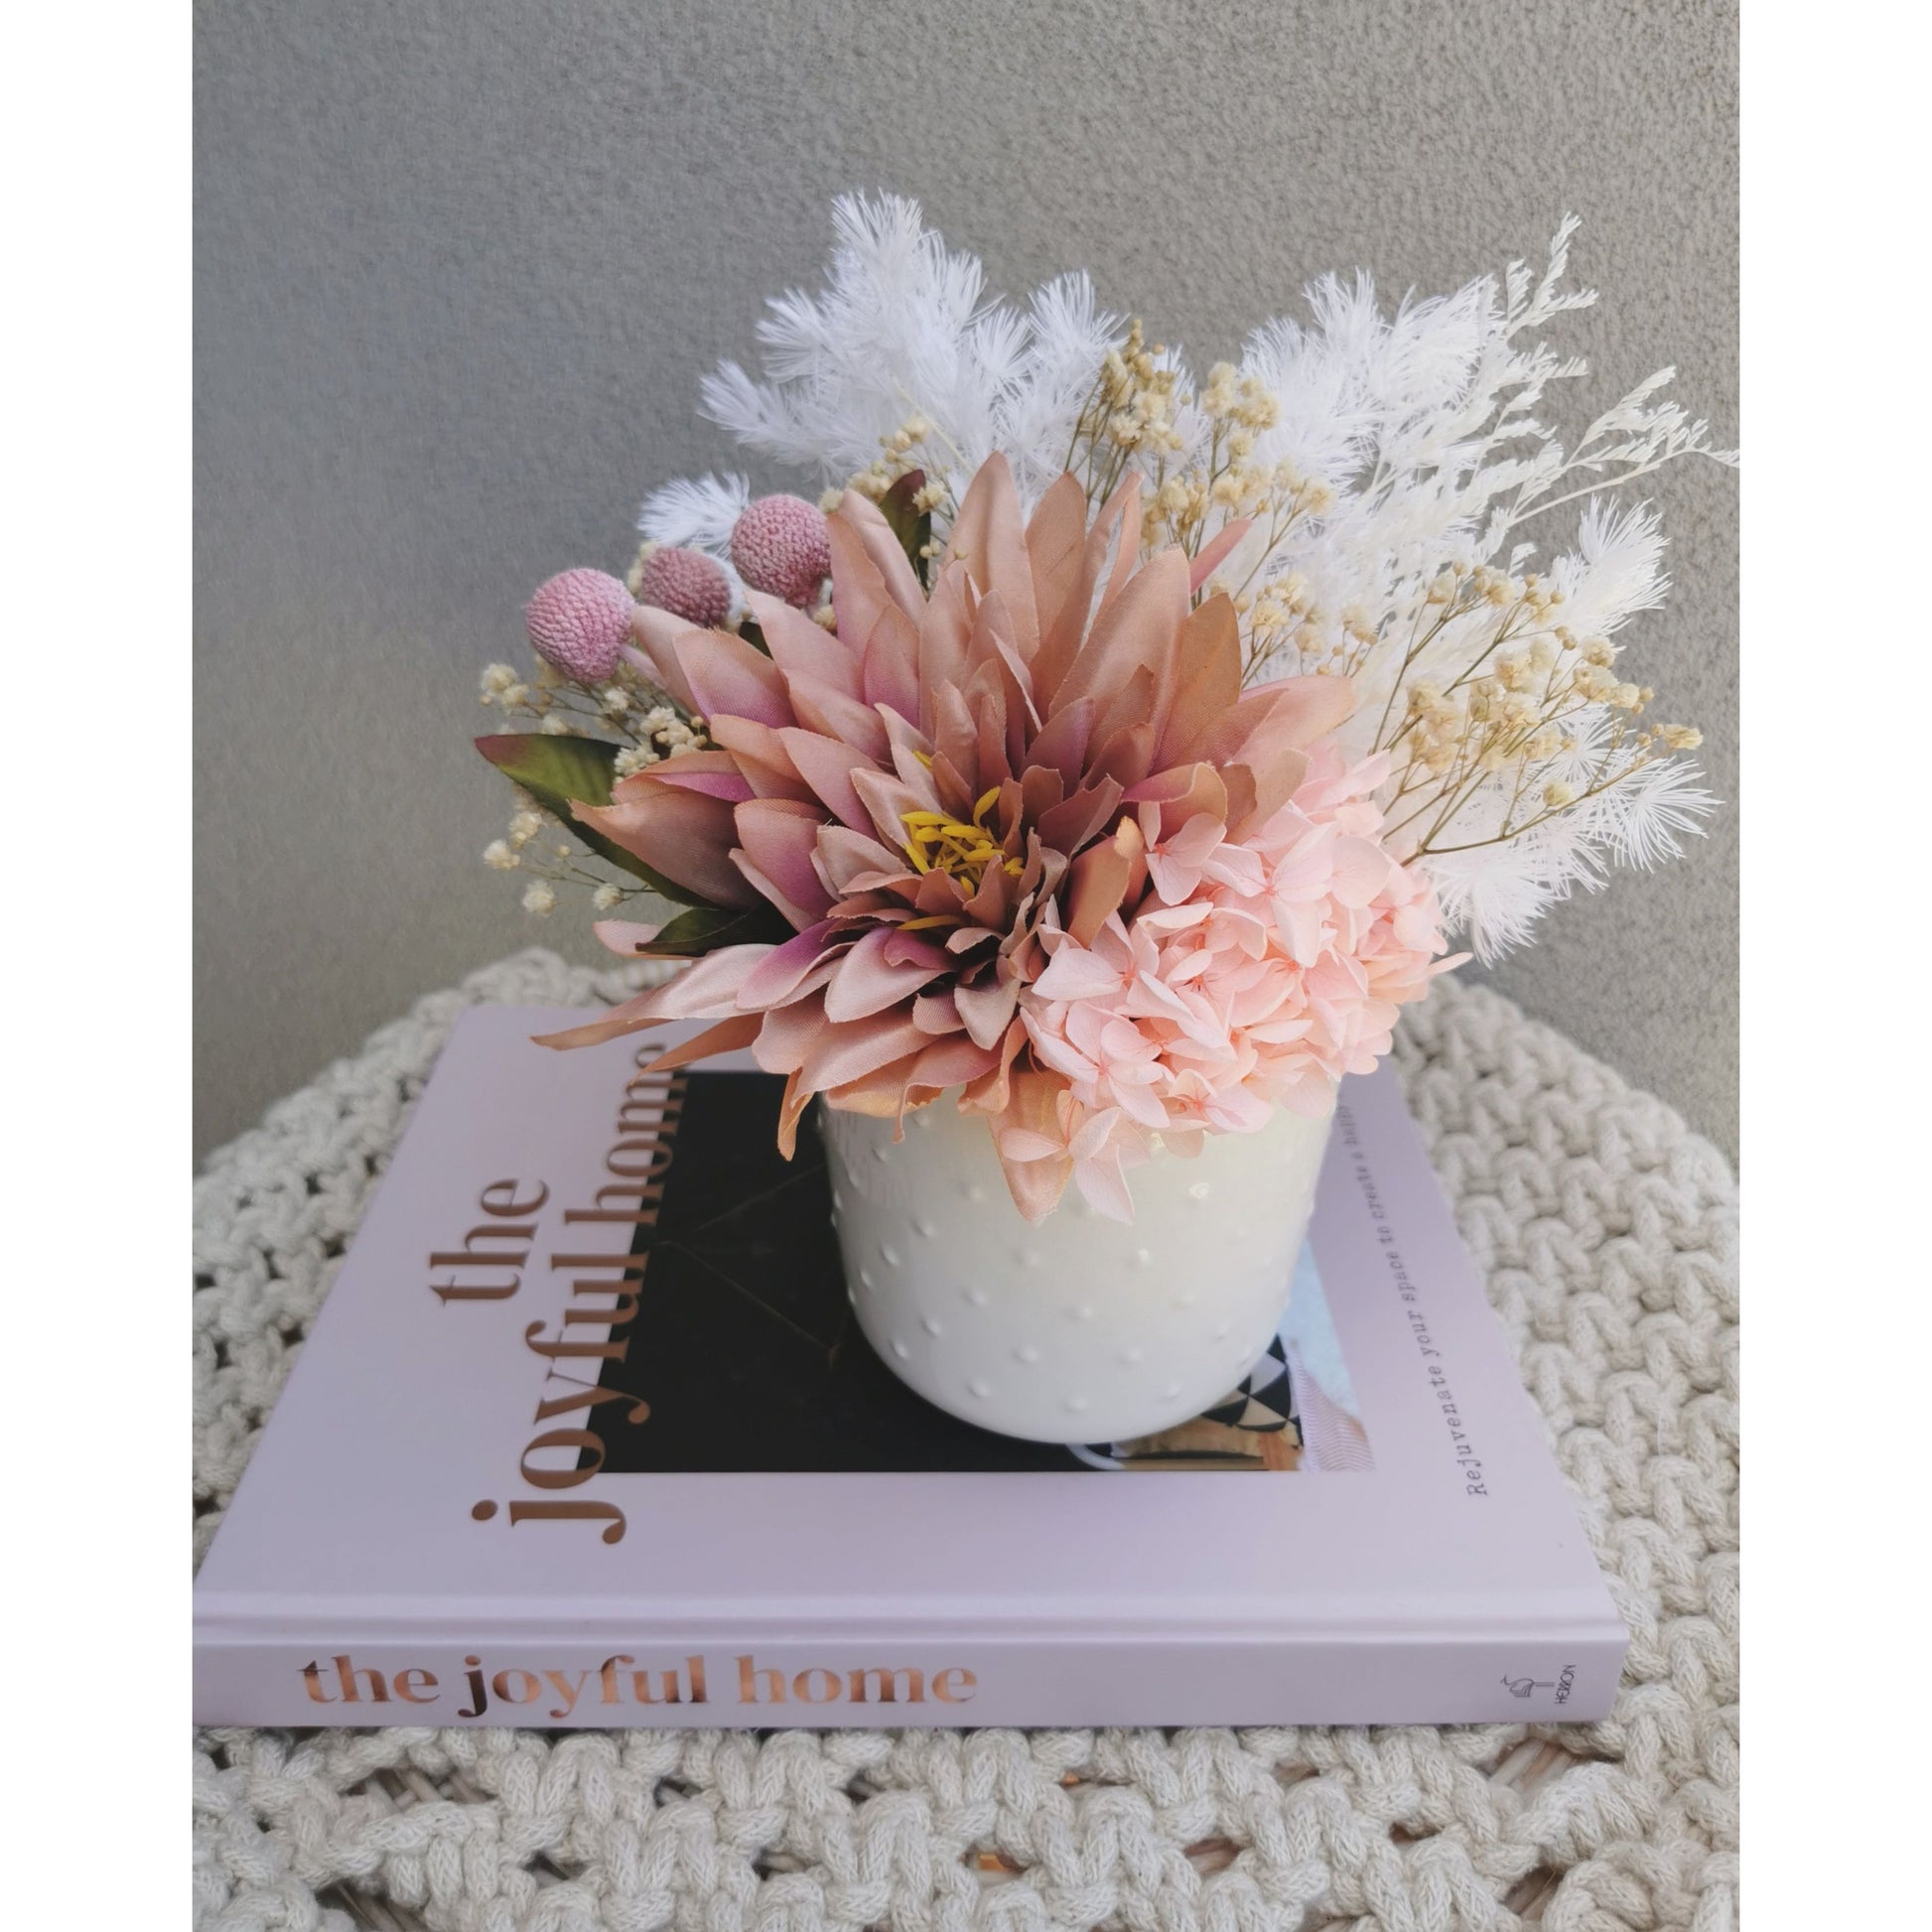 Dried & Preserved flower arrangement with silk artificial Dahlia flower. Photo shows arrangement sitting on a book against a blank wall